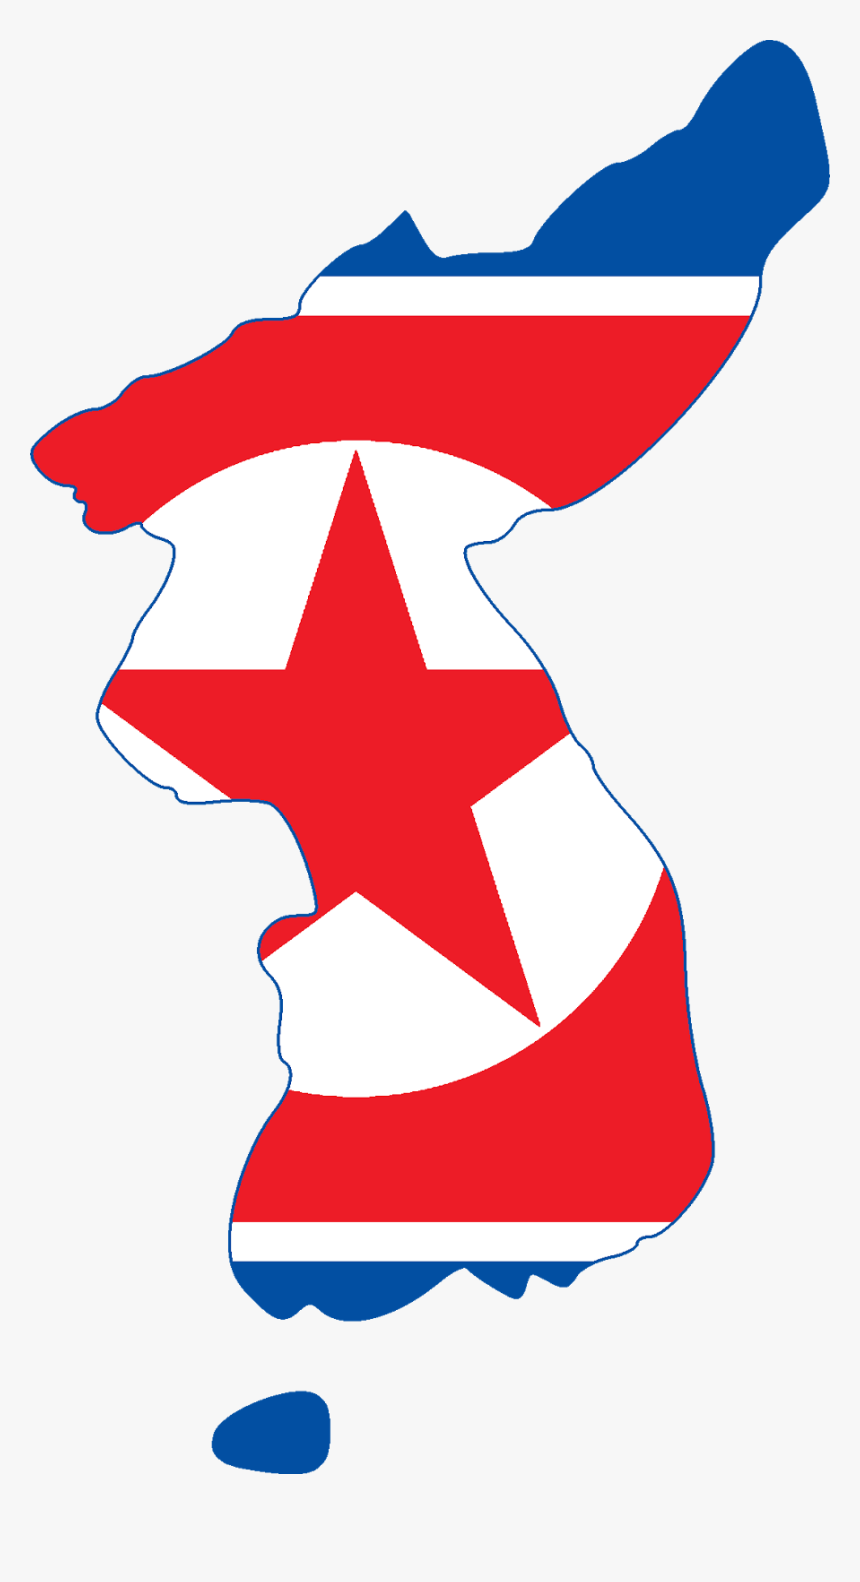 North Korea Flag With Map Graphics - Korea Map Dprk Flag, HD Png Download, Free Download